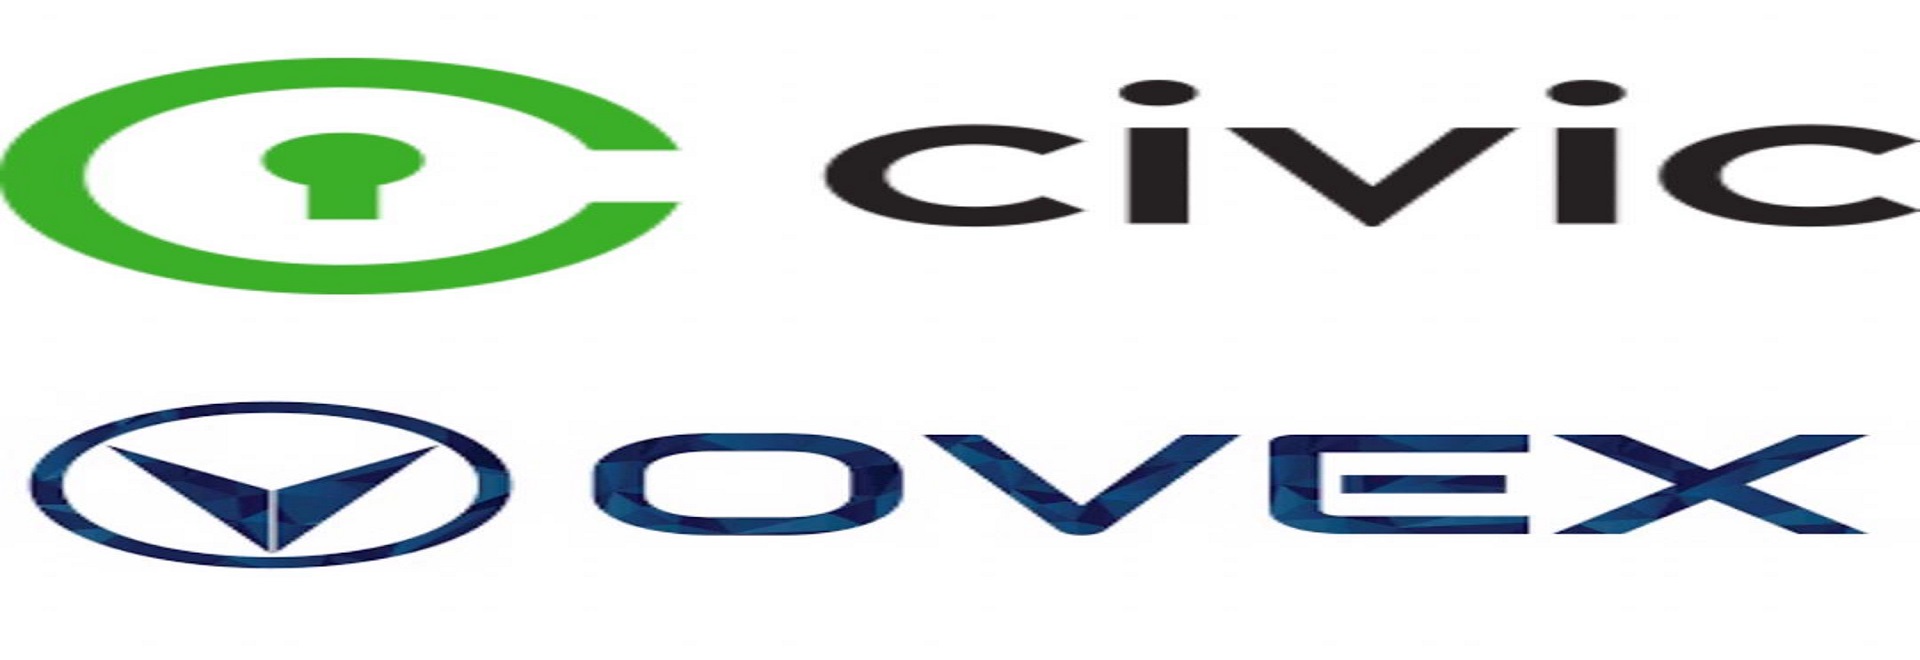 WhatsApp Image 2019 04 10 at 11.34.36 AM - OVEX Partners with Civic